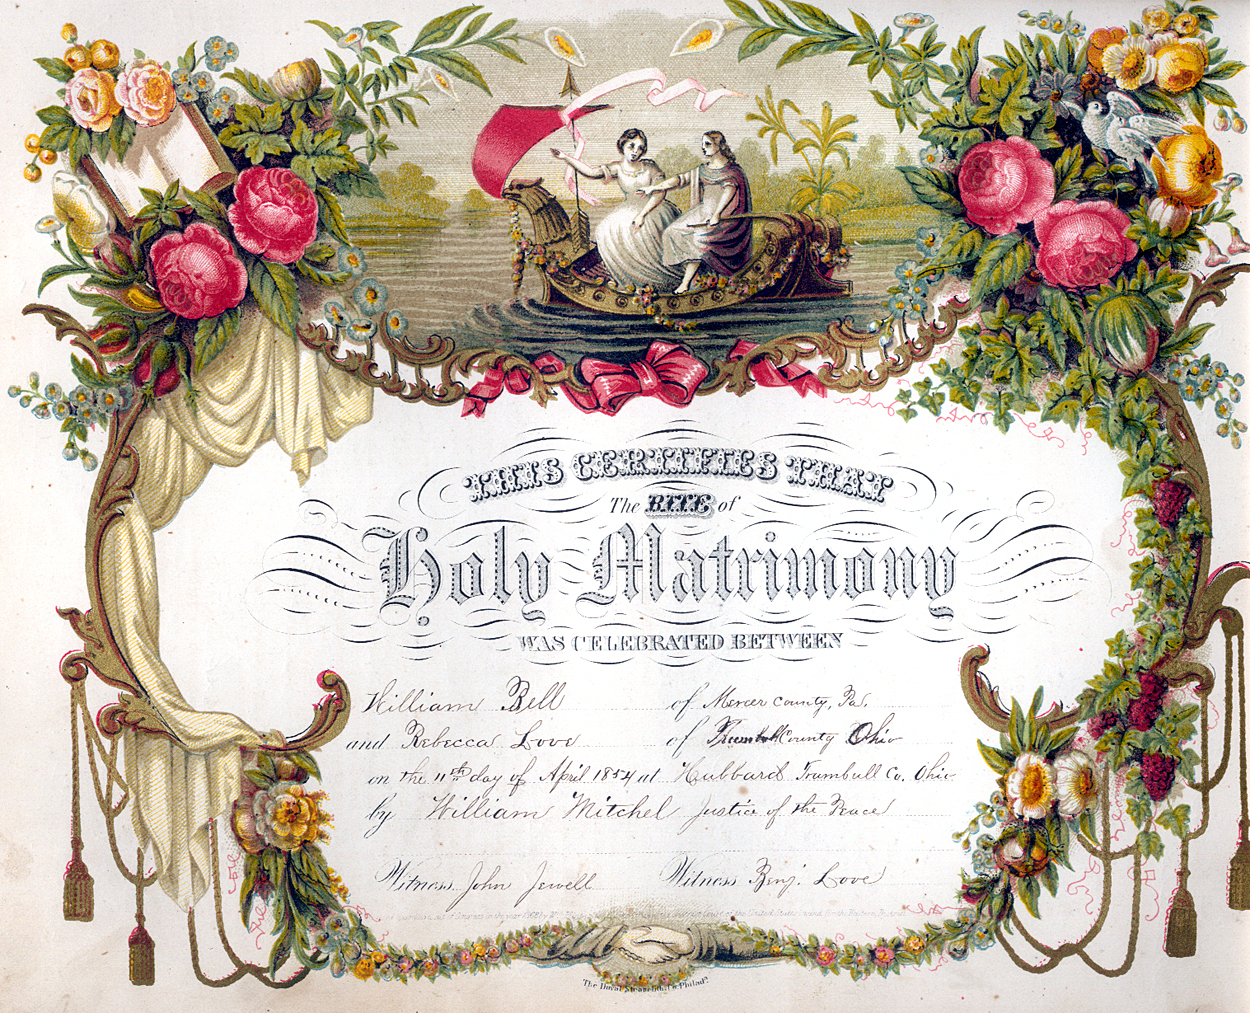 William Bell Family Bible: Marriage License